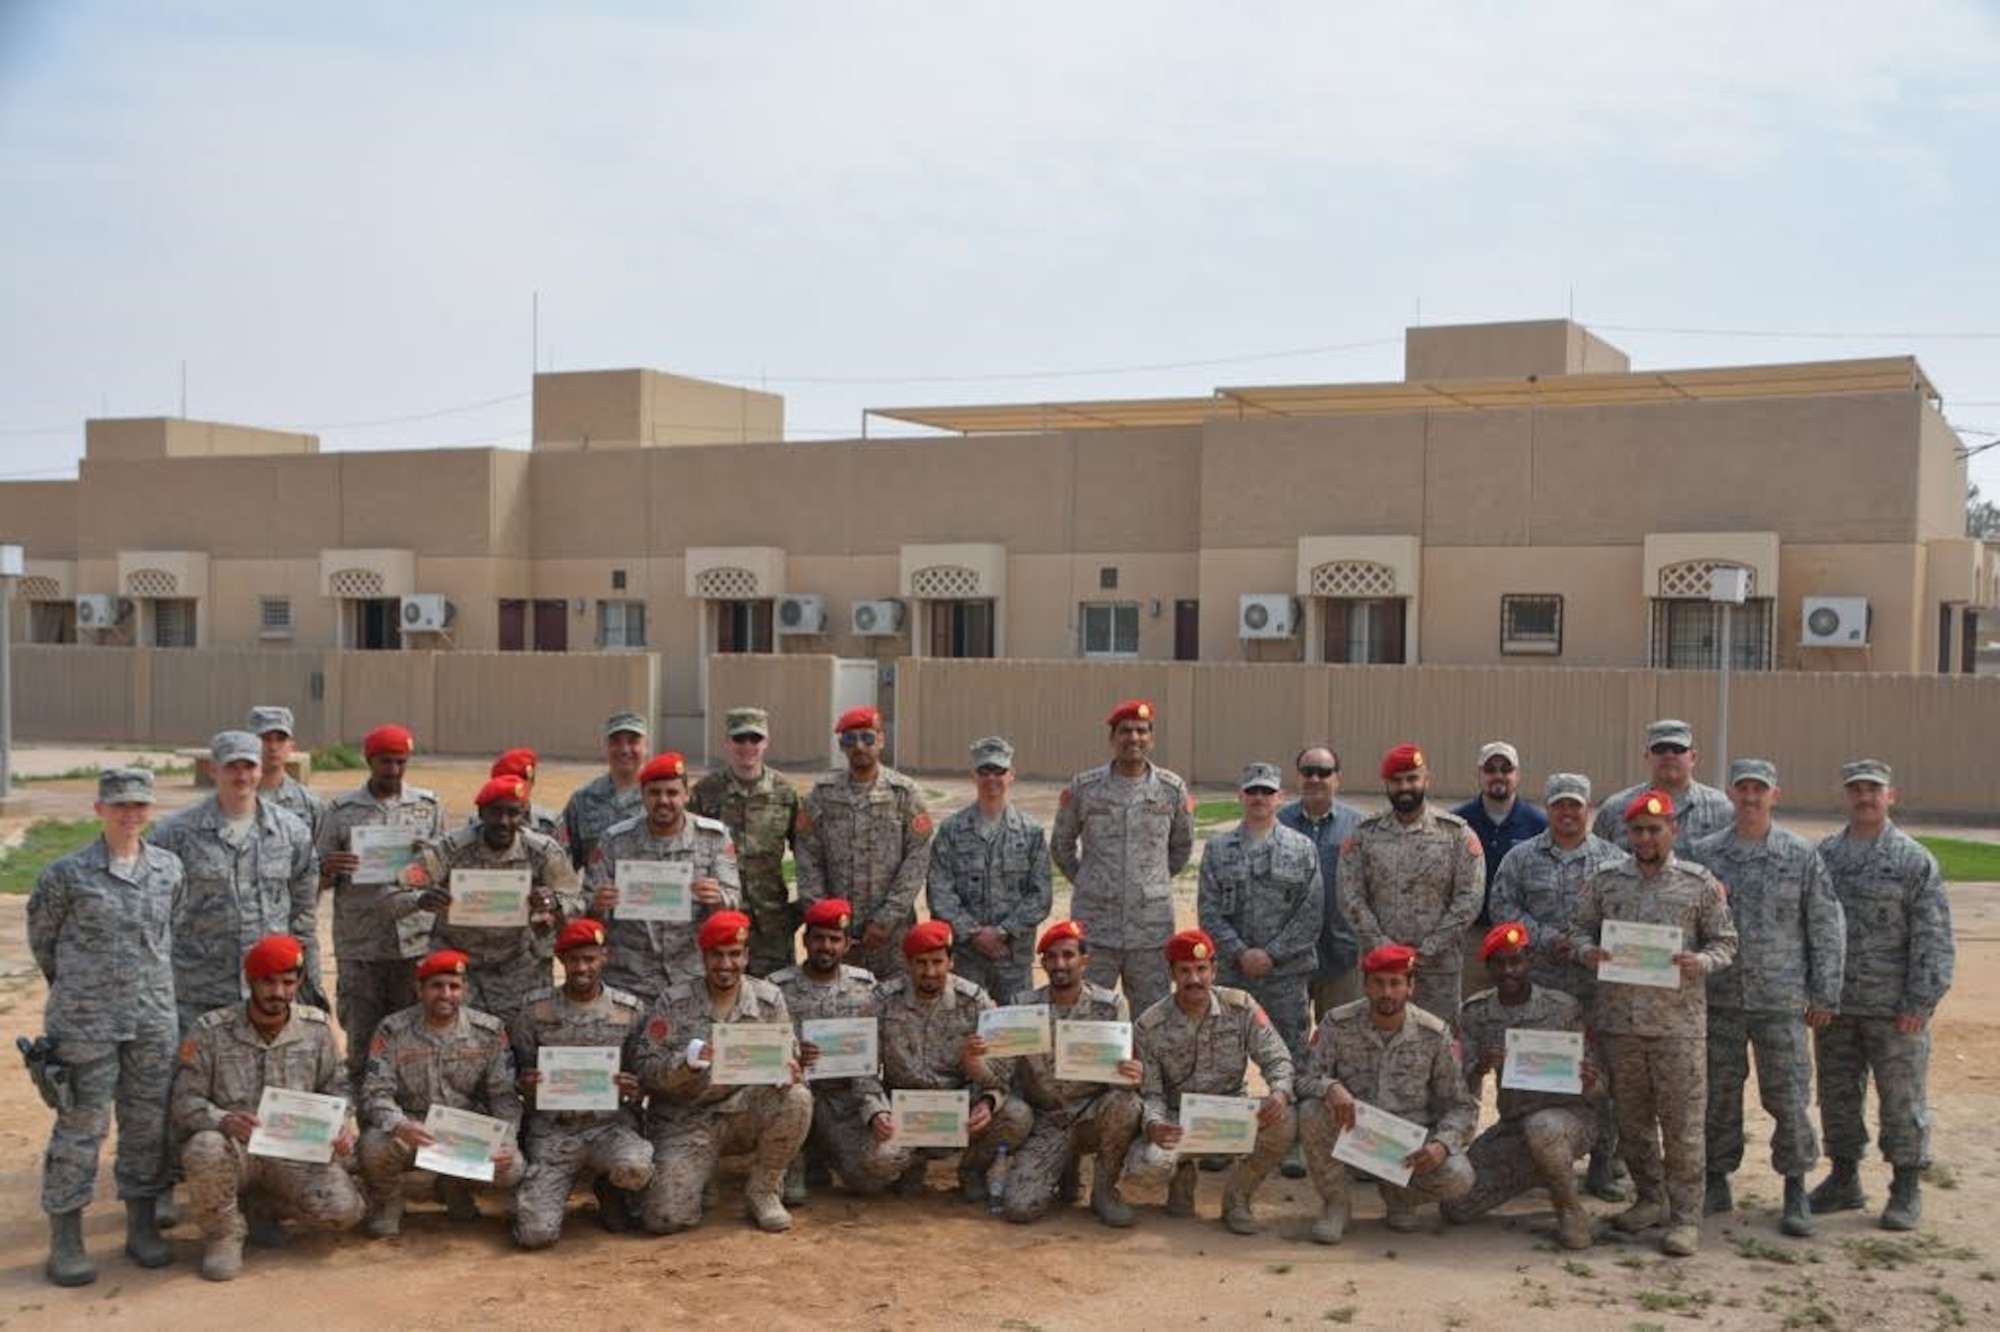 Members of the Saudi Arabia Ministry of Defense Military Police pose for a photo during graduation from a three-week training exercise with the 879th Expeditionary Security Forces Squadron at Eskan Village, Kingdom of Saudi Arabia, March 2, 2017. Airmen and Saudi police members trained in multiple areas of security protection, including: formations for escorting, identifying explosives and vehicle searches.  (Courtesy photo)